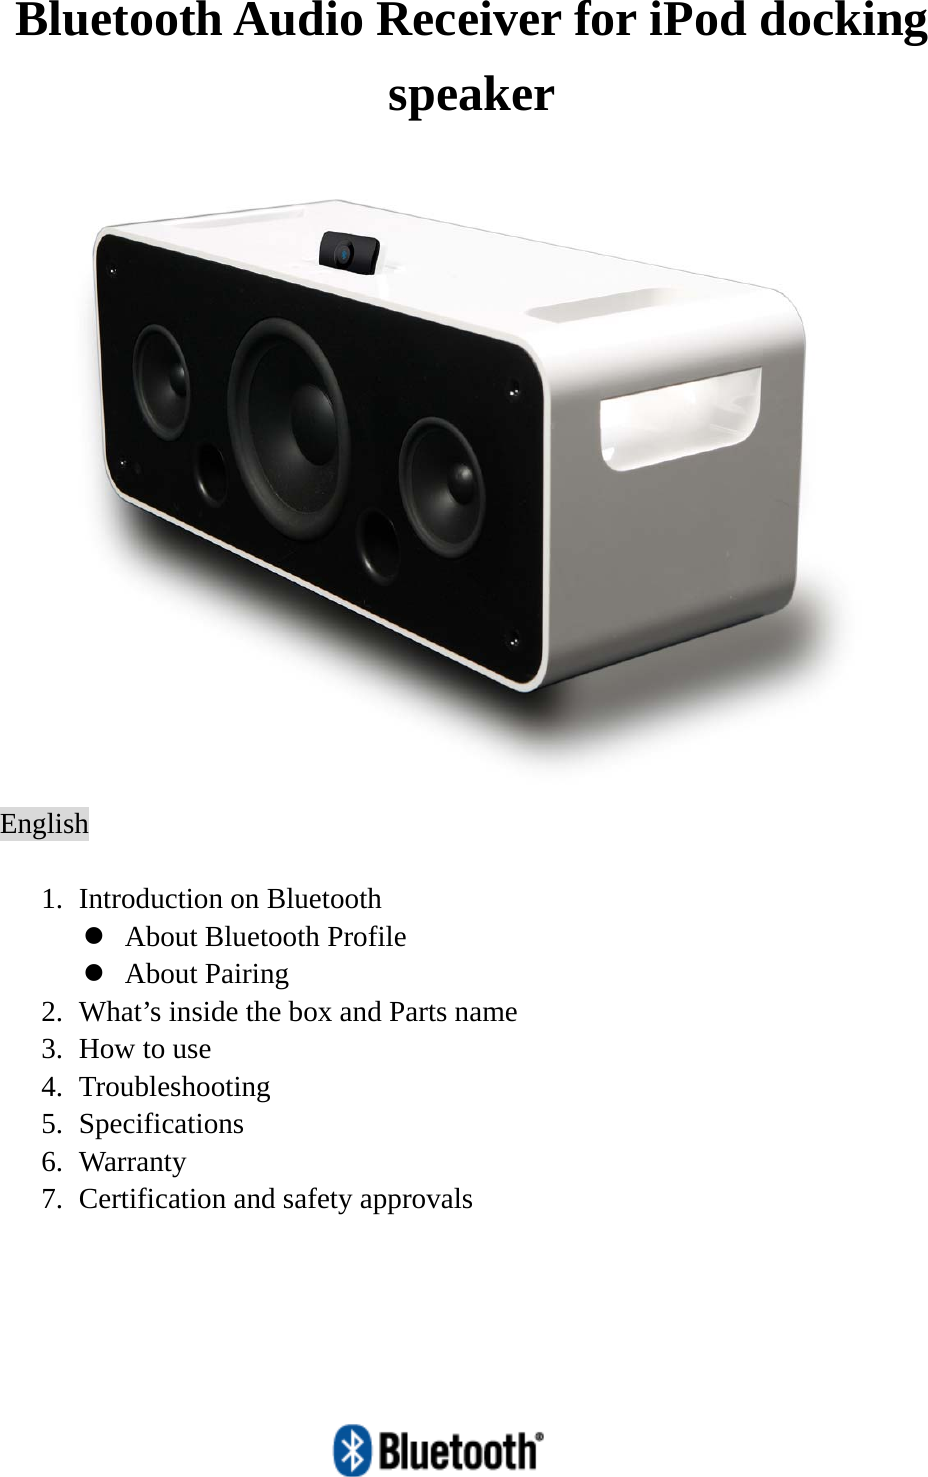   Bluetooth Audio Receiver for iPod docking speaker  English  1. Introduction on Bluetooth   z About Bluetooth Profile z About Pairing 2. What’s inside the box and Parts name 3. How to use 4. Troubleshooting 5. Specifications 6. Warranty 7. Certification and safety approvals  